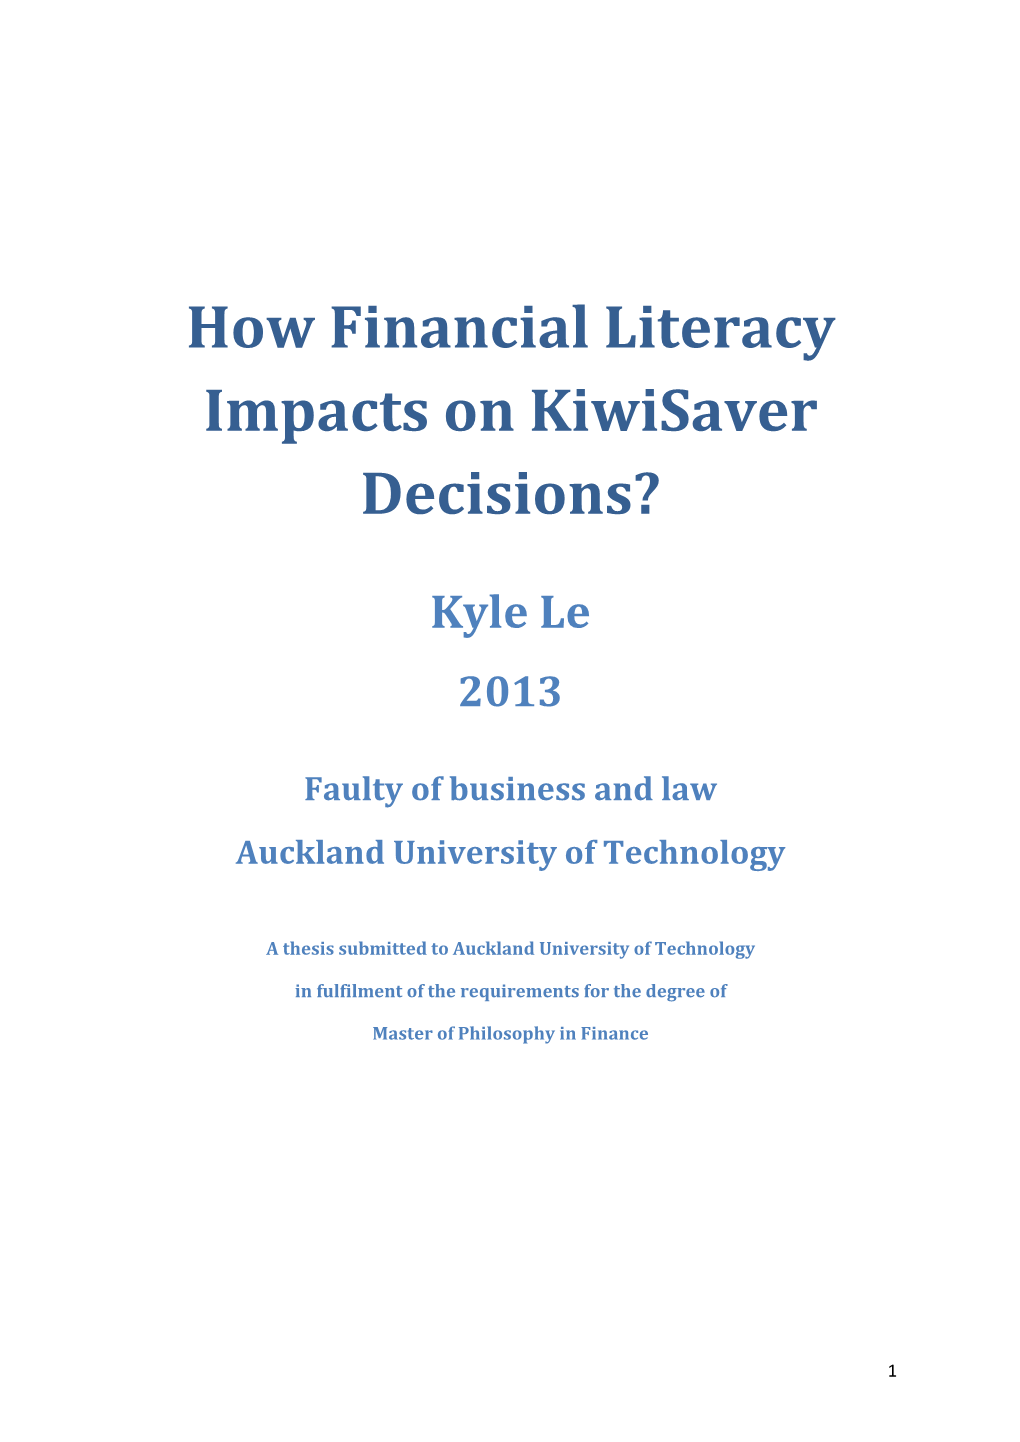 How Financial Literacy Impacts on Kiwisaver Decisions?